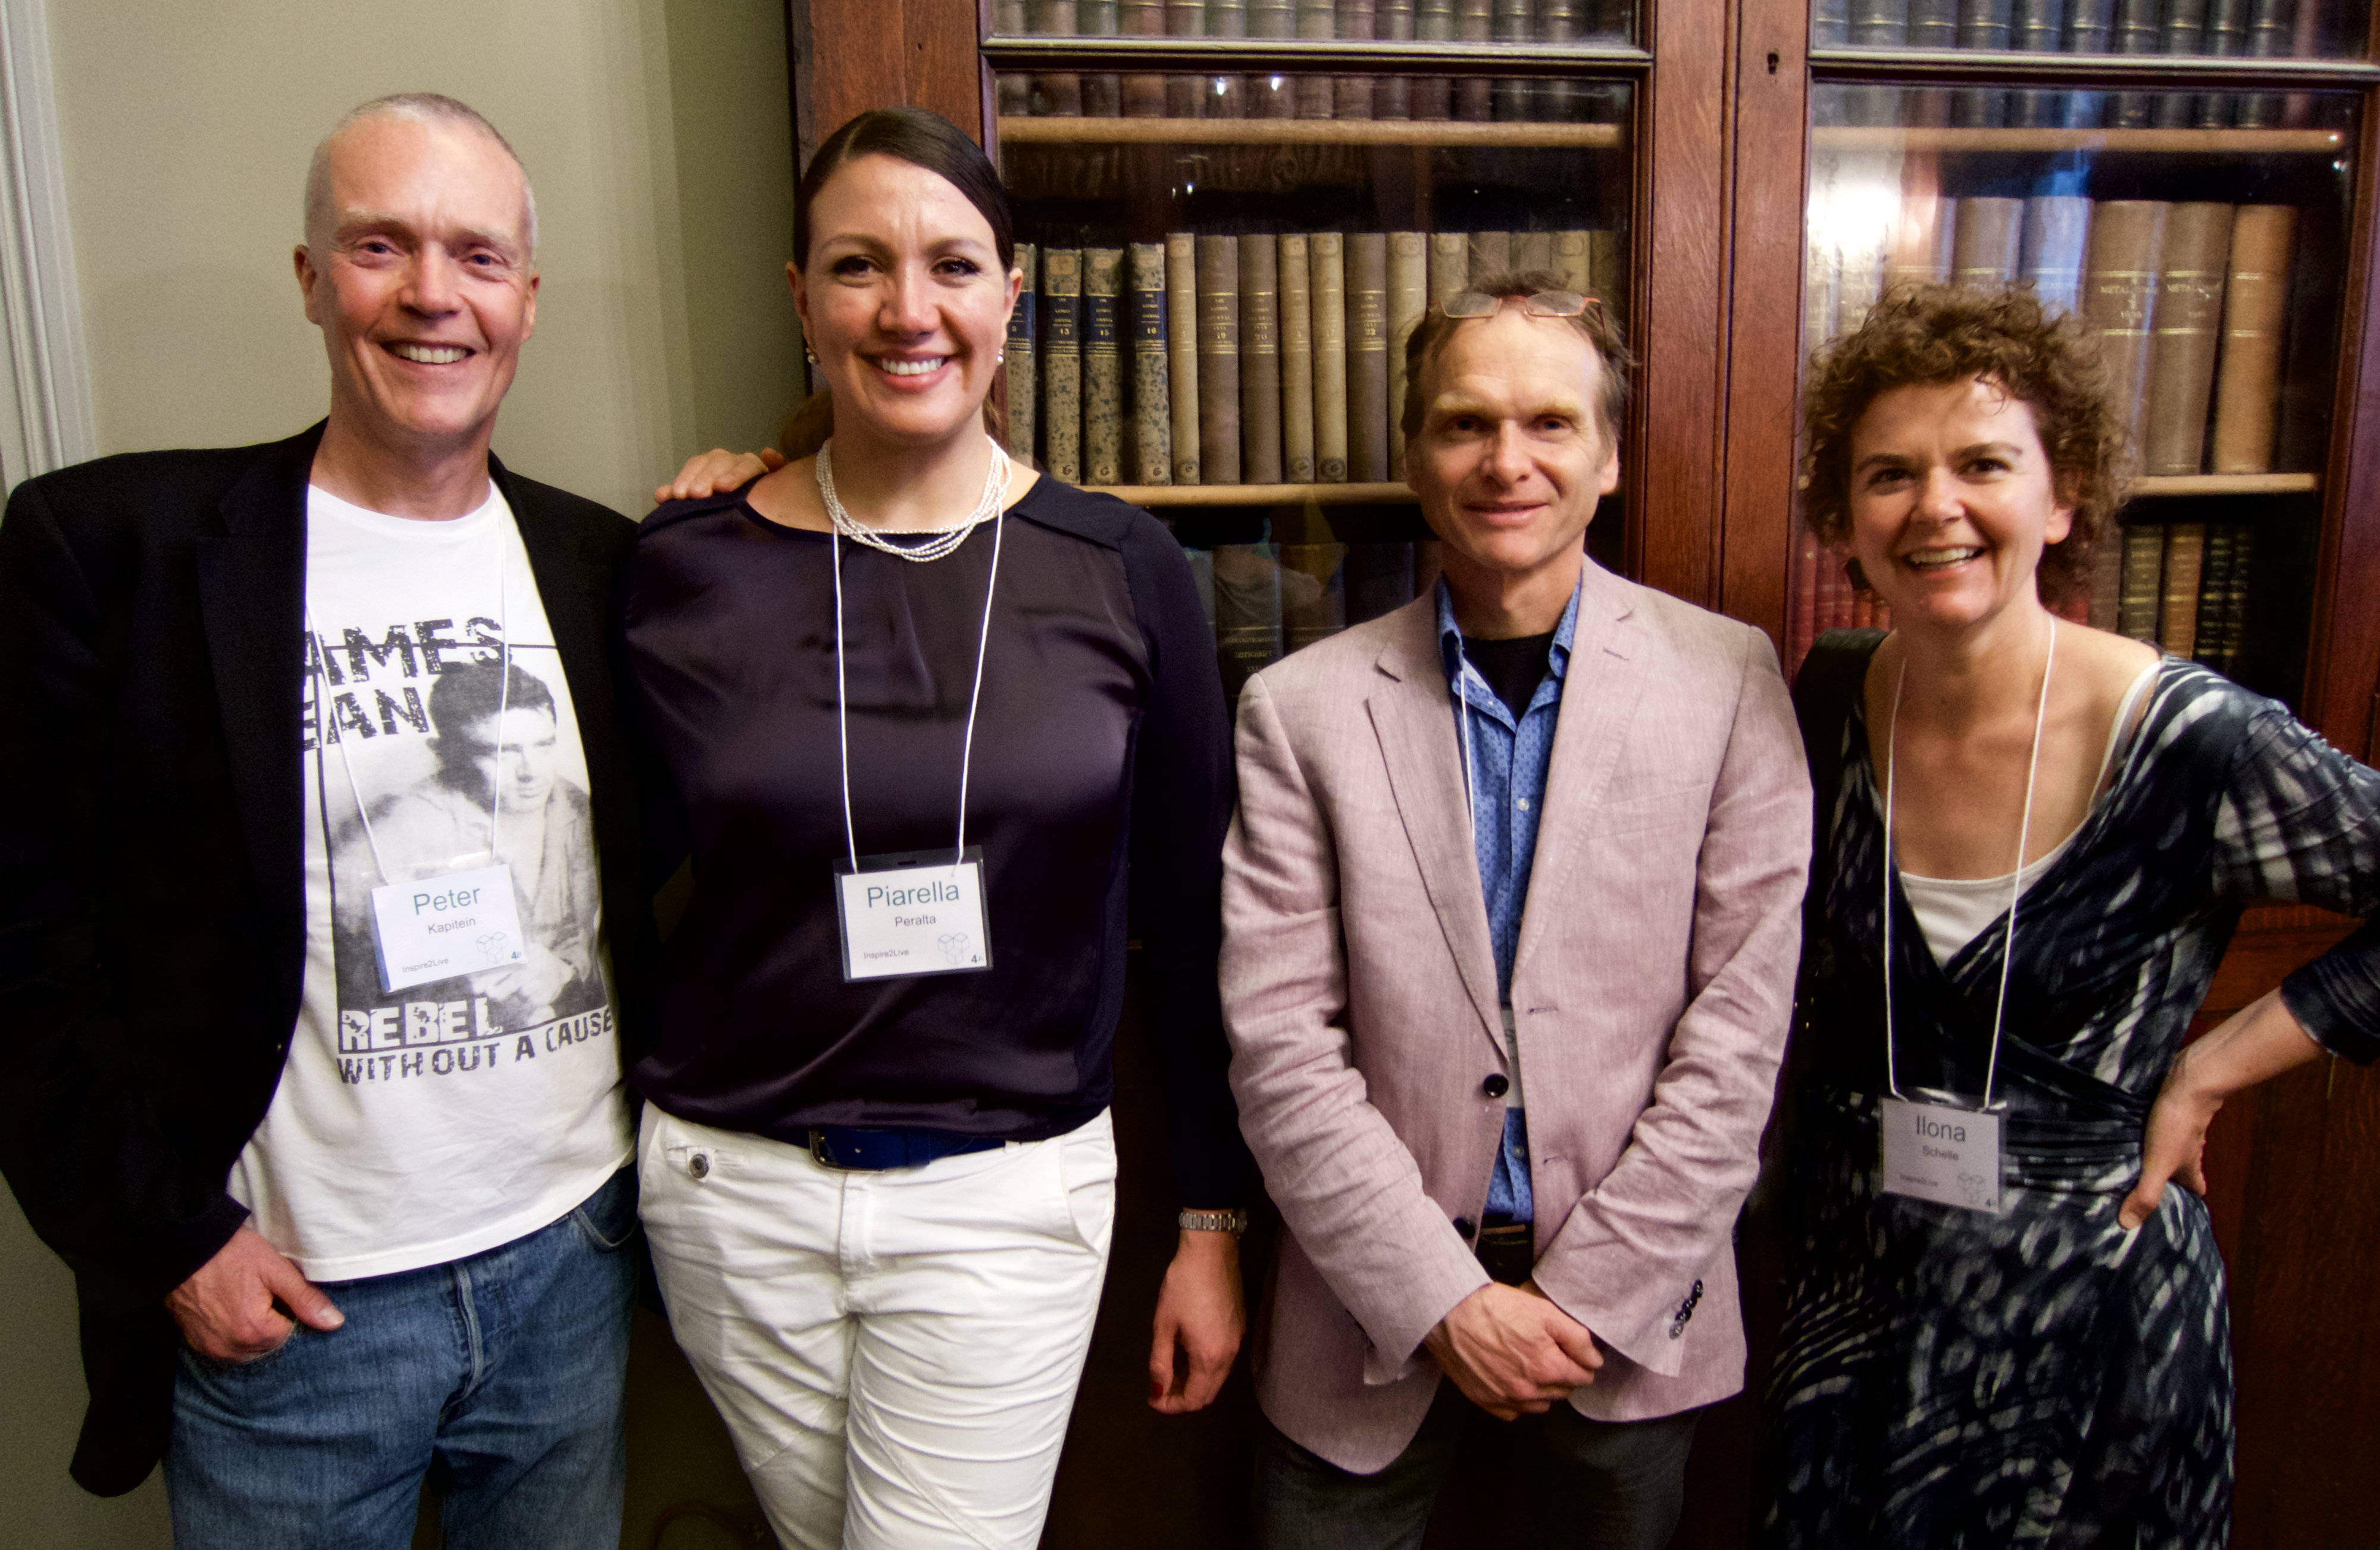 Sage Mentors Peter Kapitein and Ilona Schelle from Inspire2Live flank Sage Scholars Piarella Peralta and Gaston Remmers at the Paris Sage Assembly, April 16, 2015.